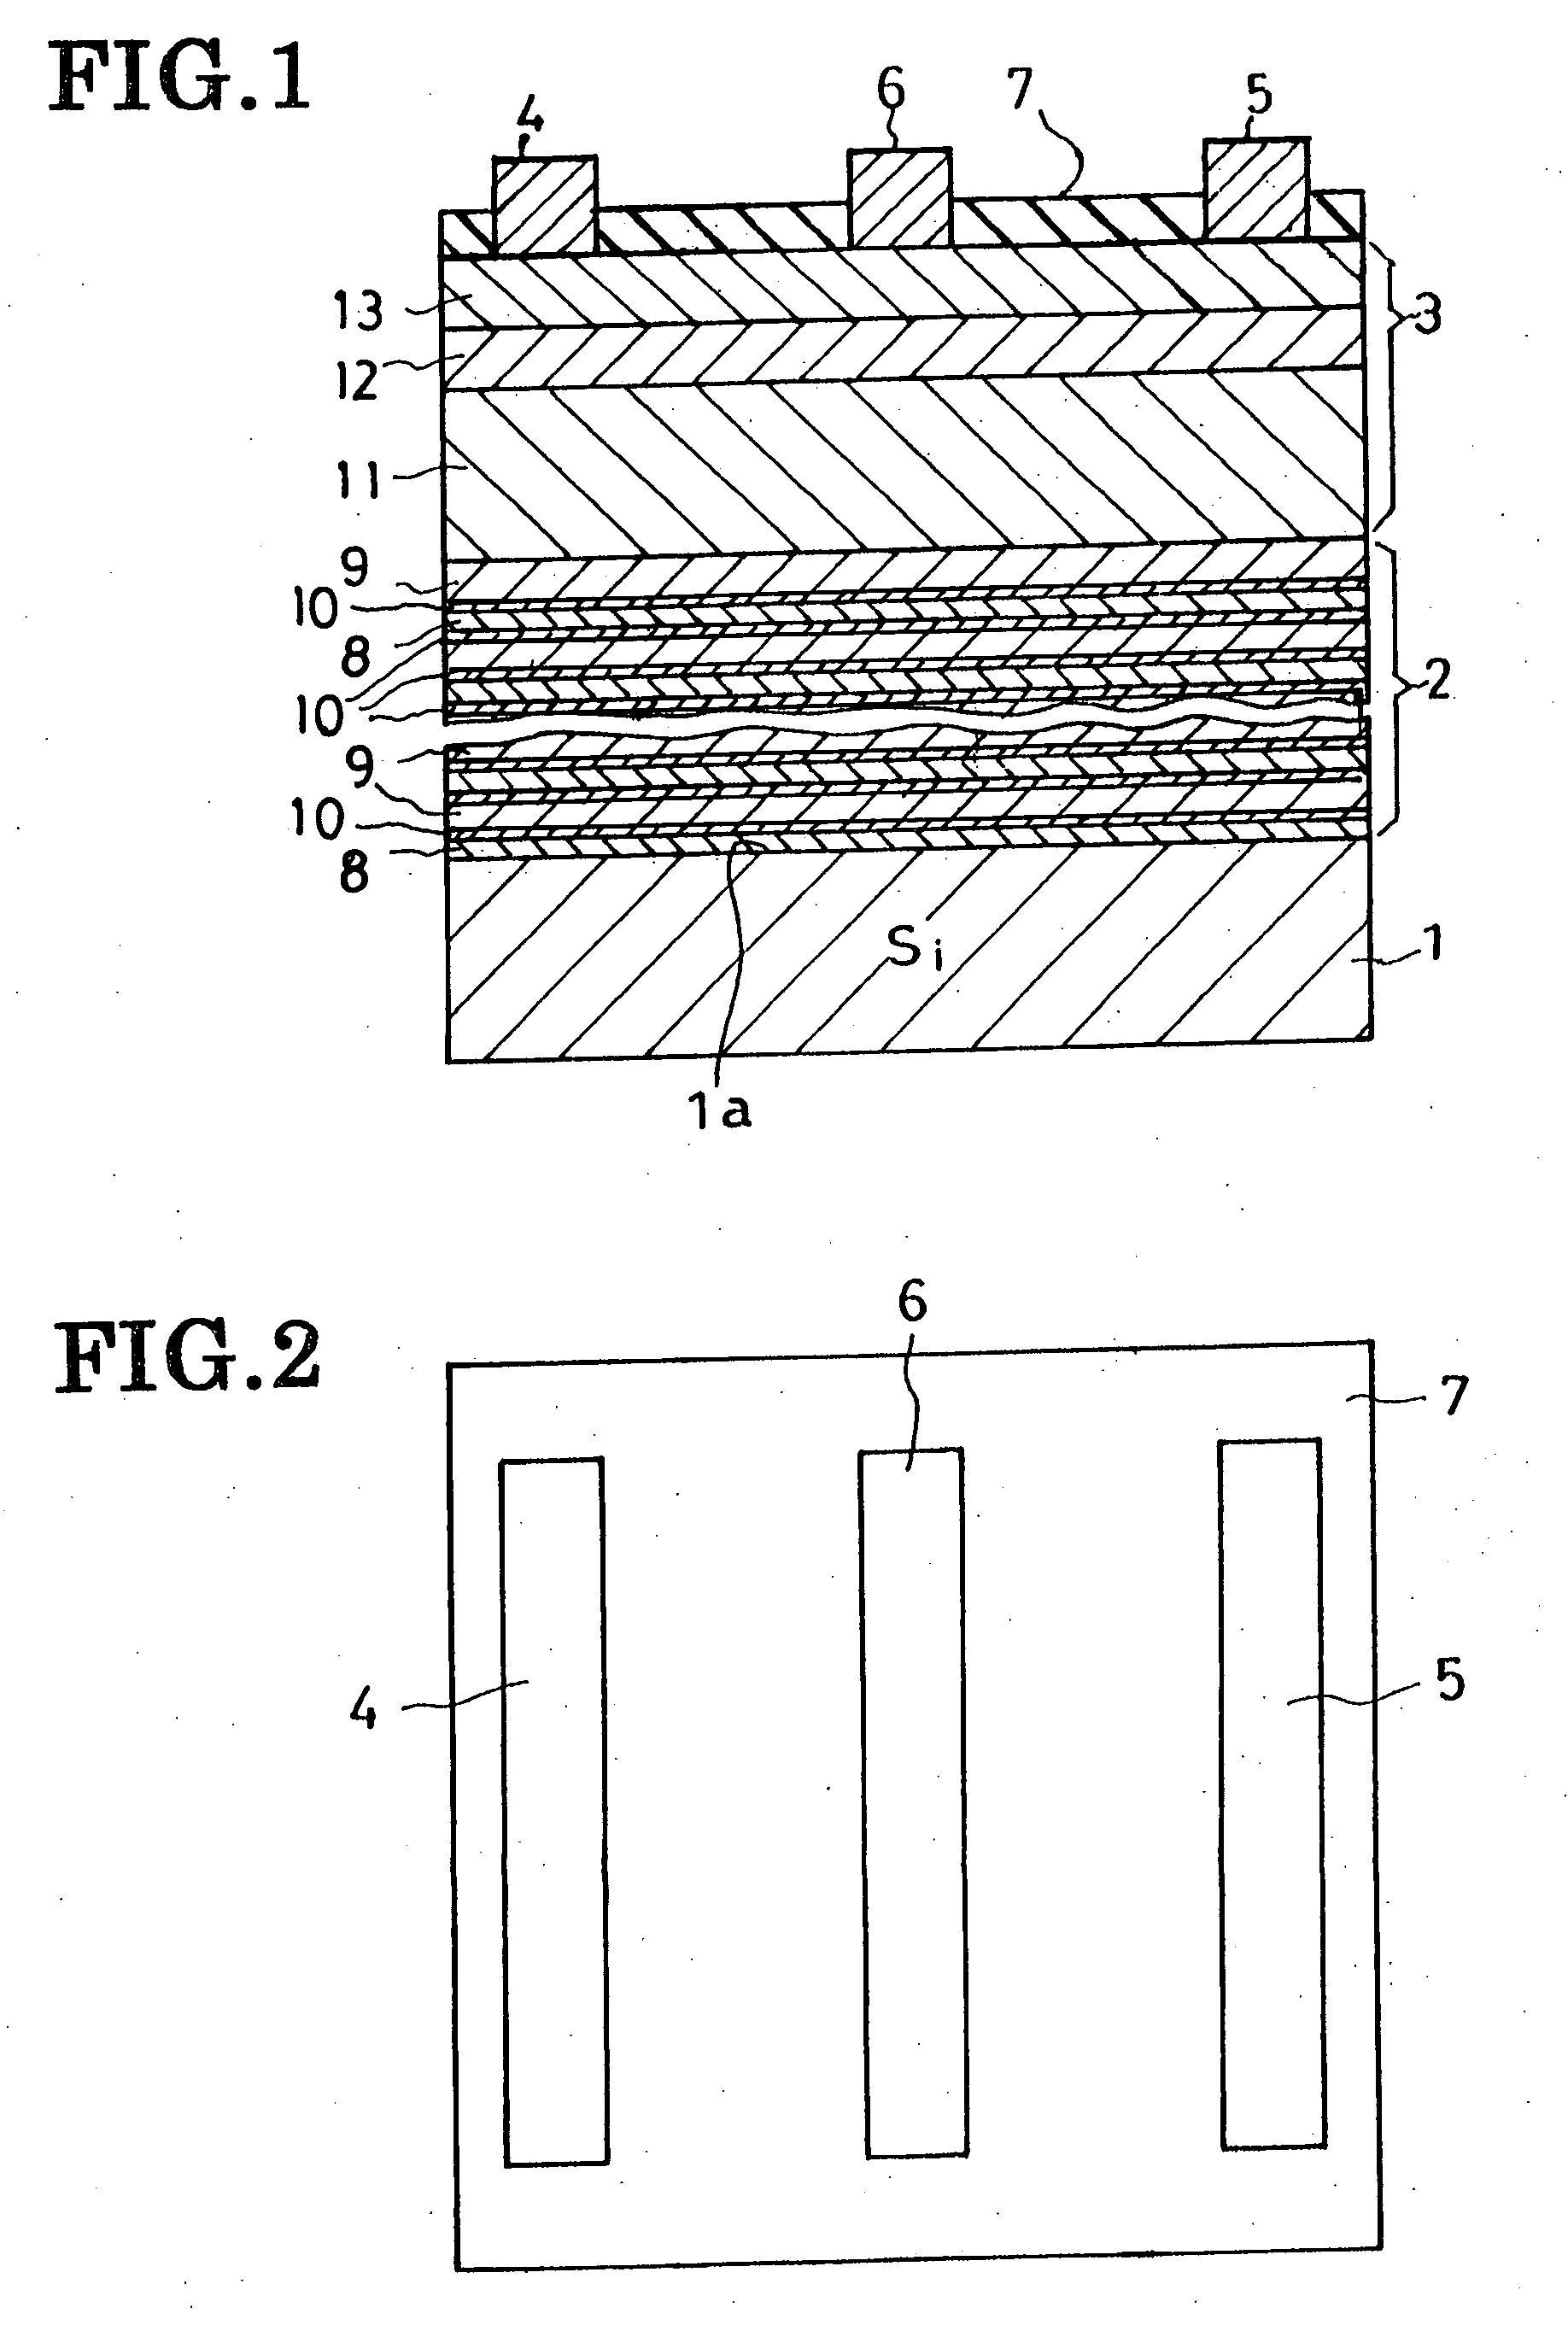 Semiconductor device and a method of making the same